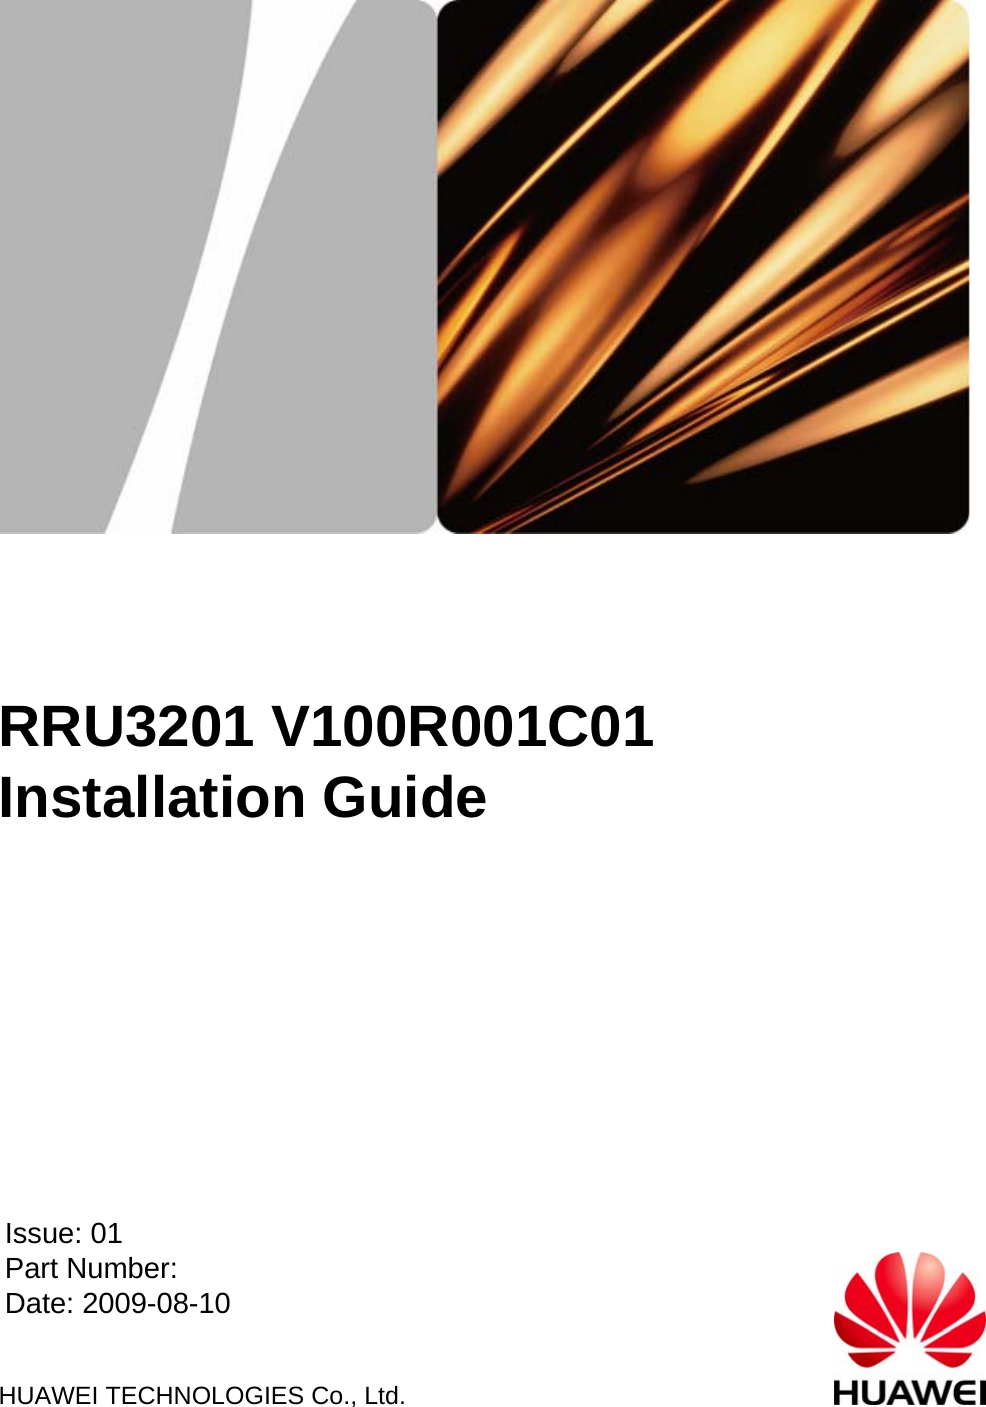 HUAWEI TECHNOLOGIES Co., Ltd.Issue: 01Part Number:Date: 2009-08-10RRU3201 V100R001C01 Installation Guide